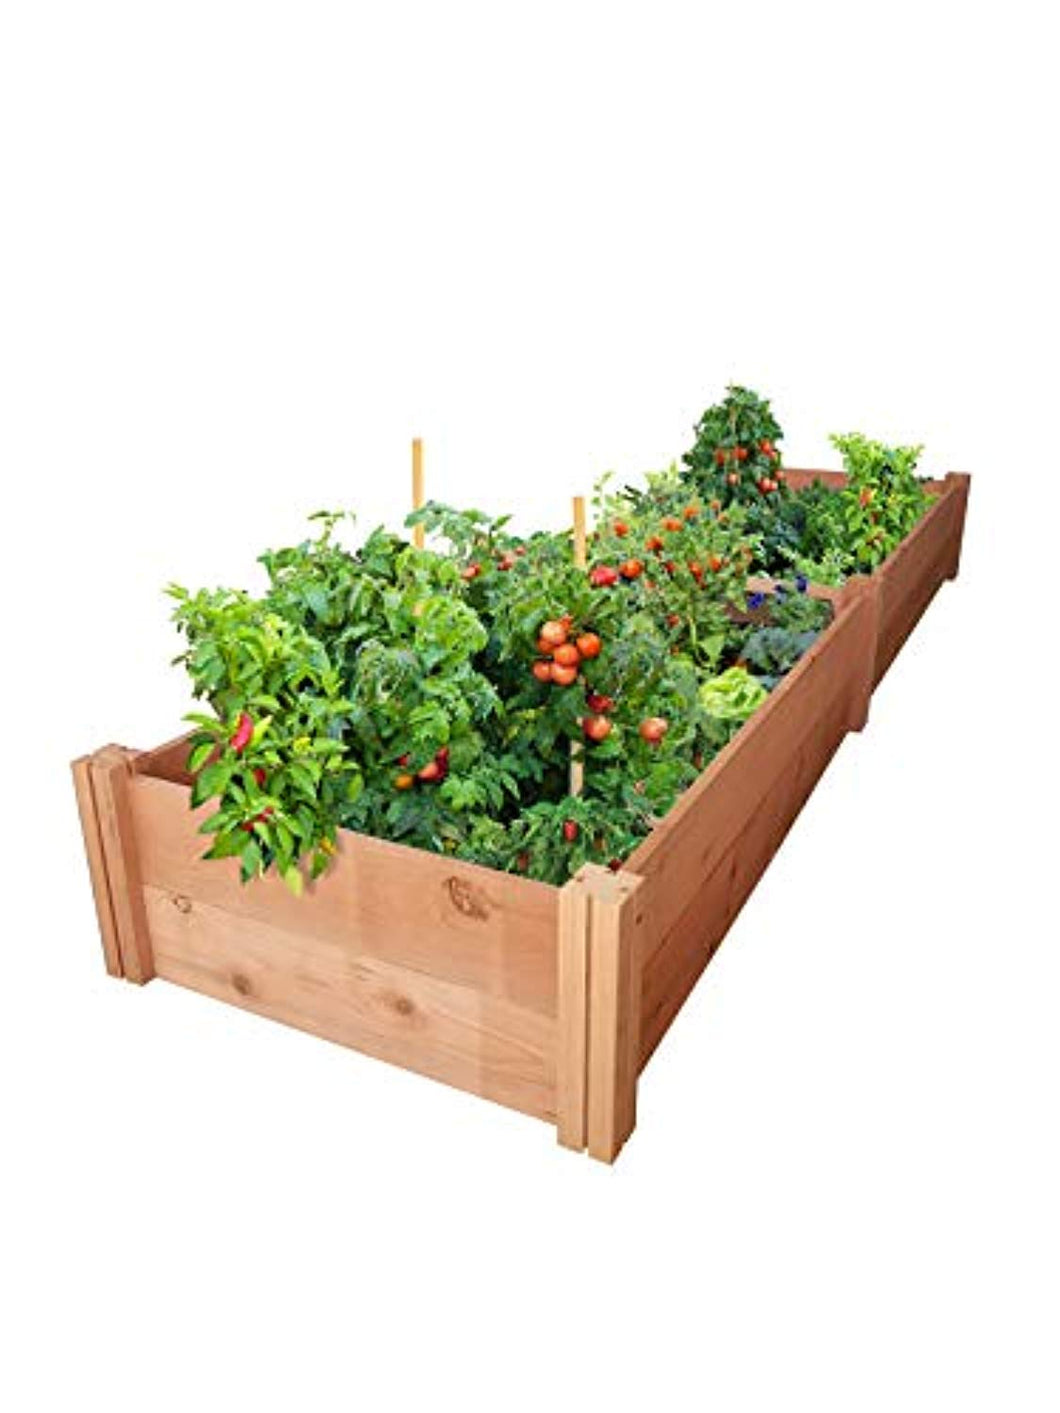 GroGardens 2' x 8' Redwood Raised Garden Bed, Grow Fresh Vegetables, Herbs, Flowers. Chemical Free, All Natural, Organic Raised Garden Bed, Tool-Free, No Tools Required.